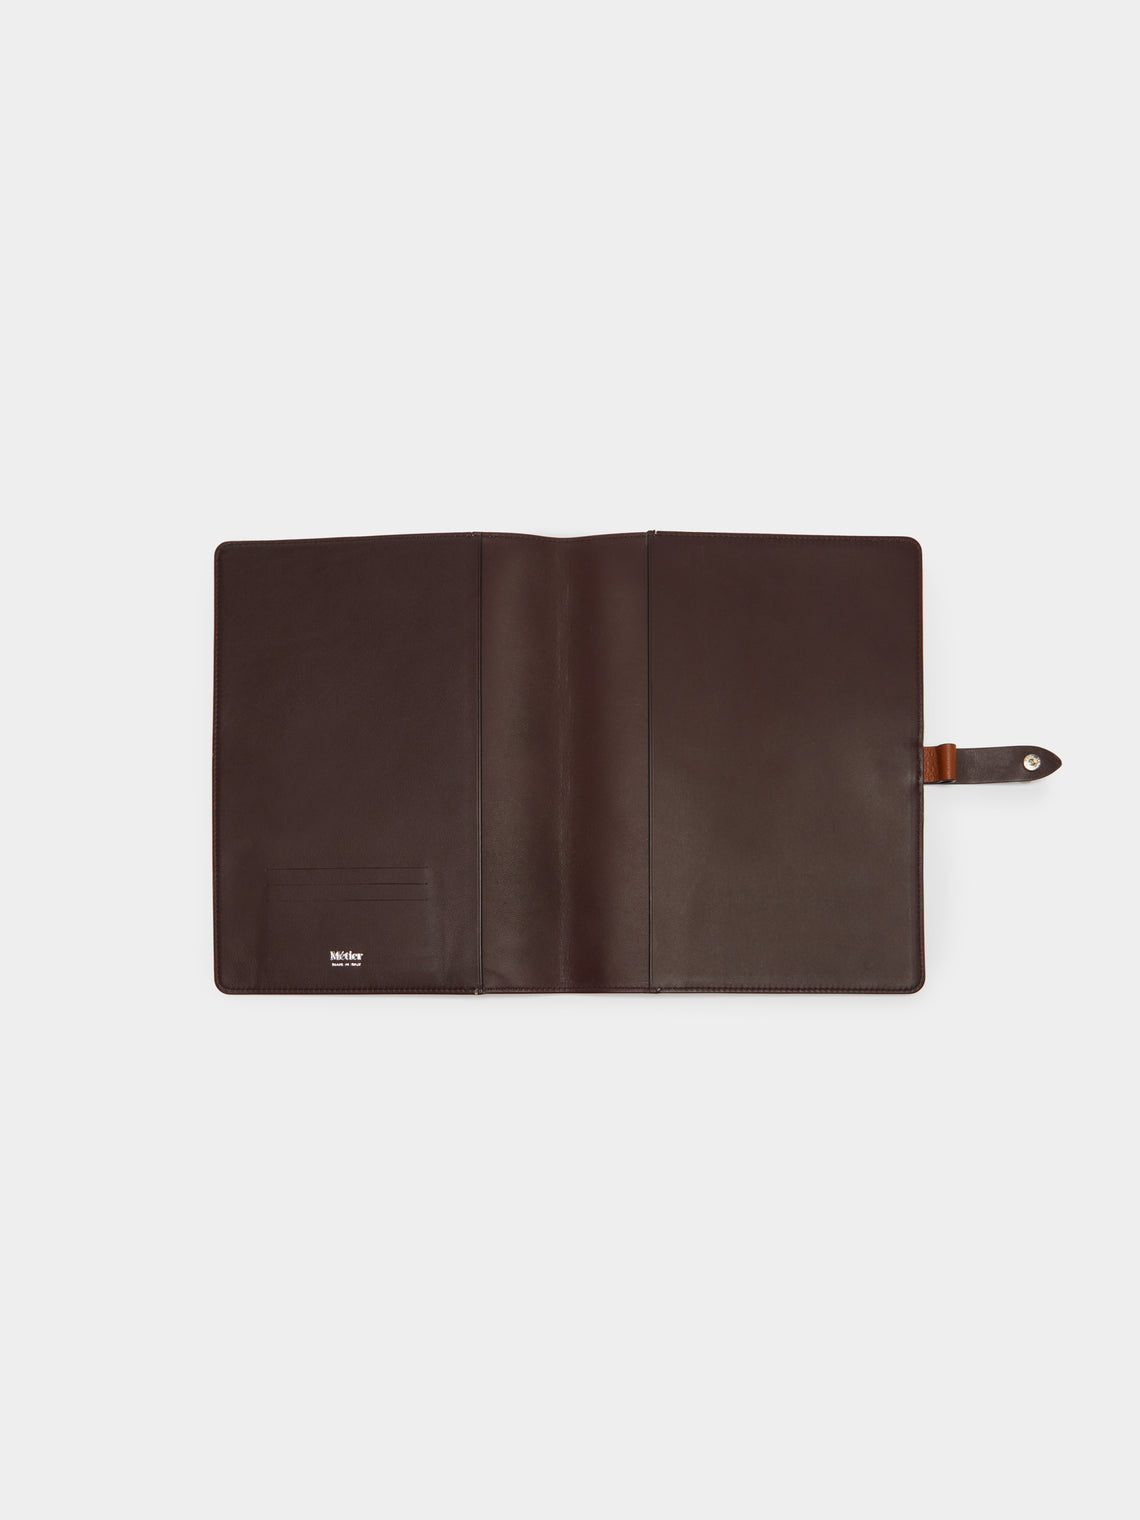 Métier - Leather Notebook Cover - Brown - ABASK